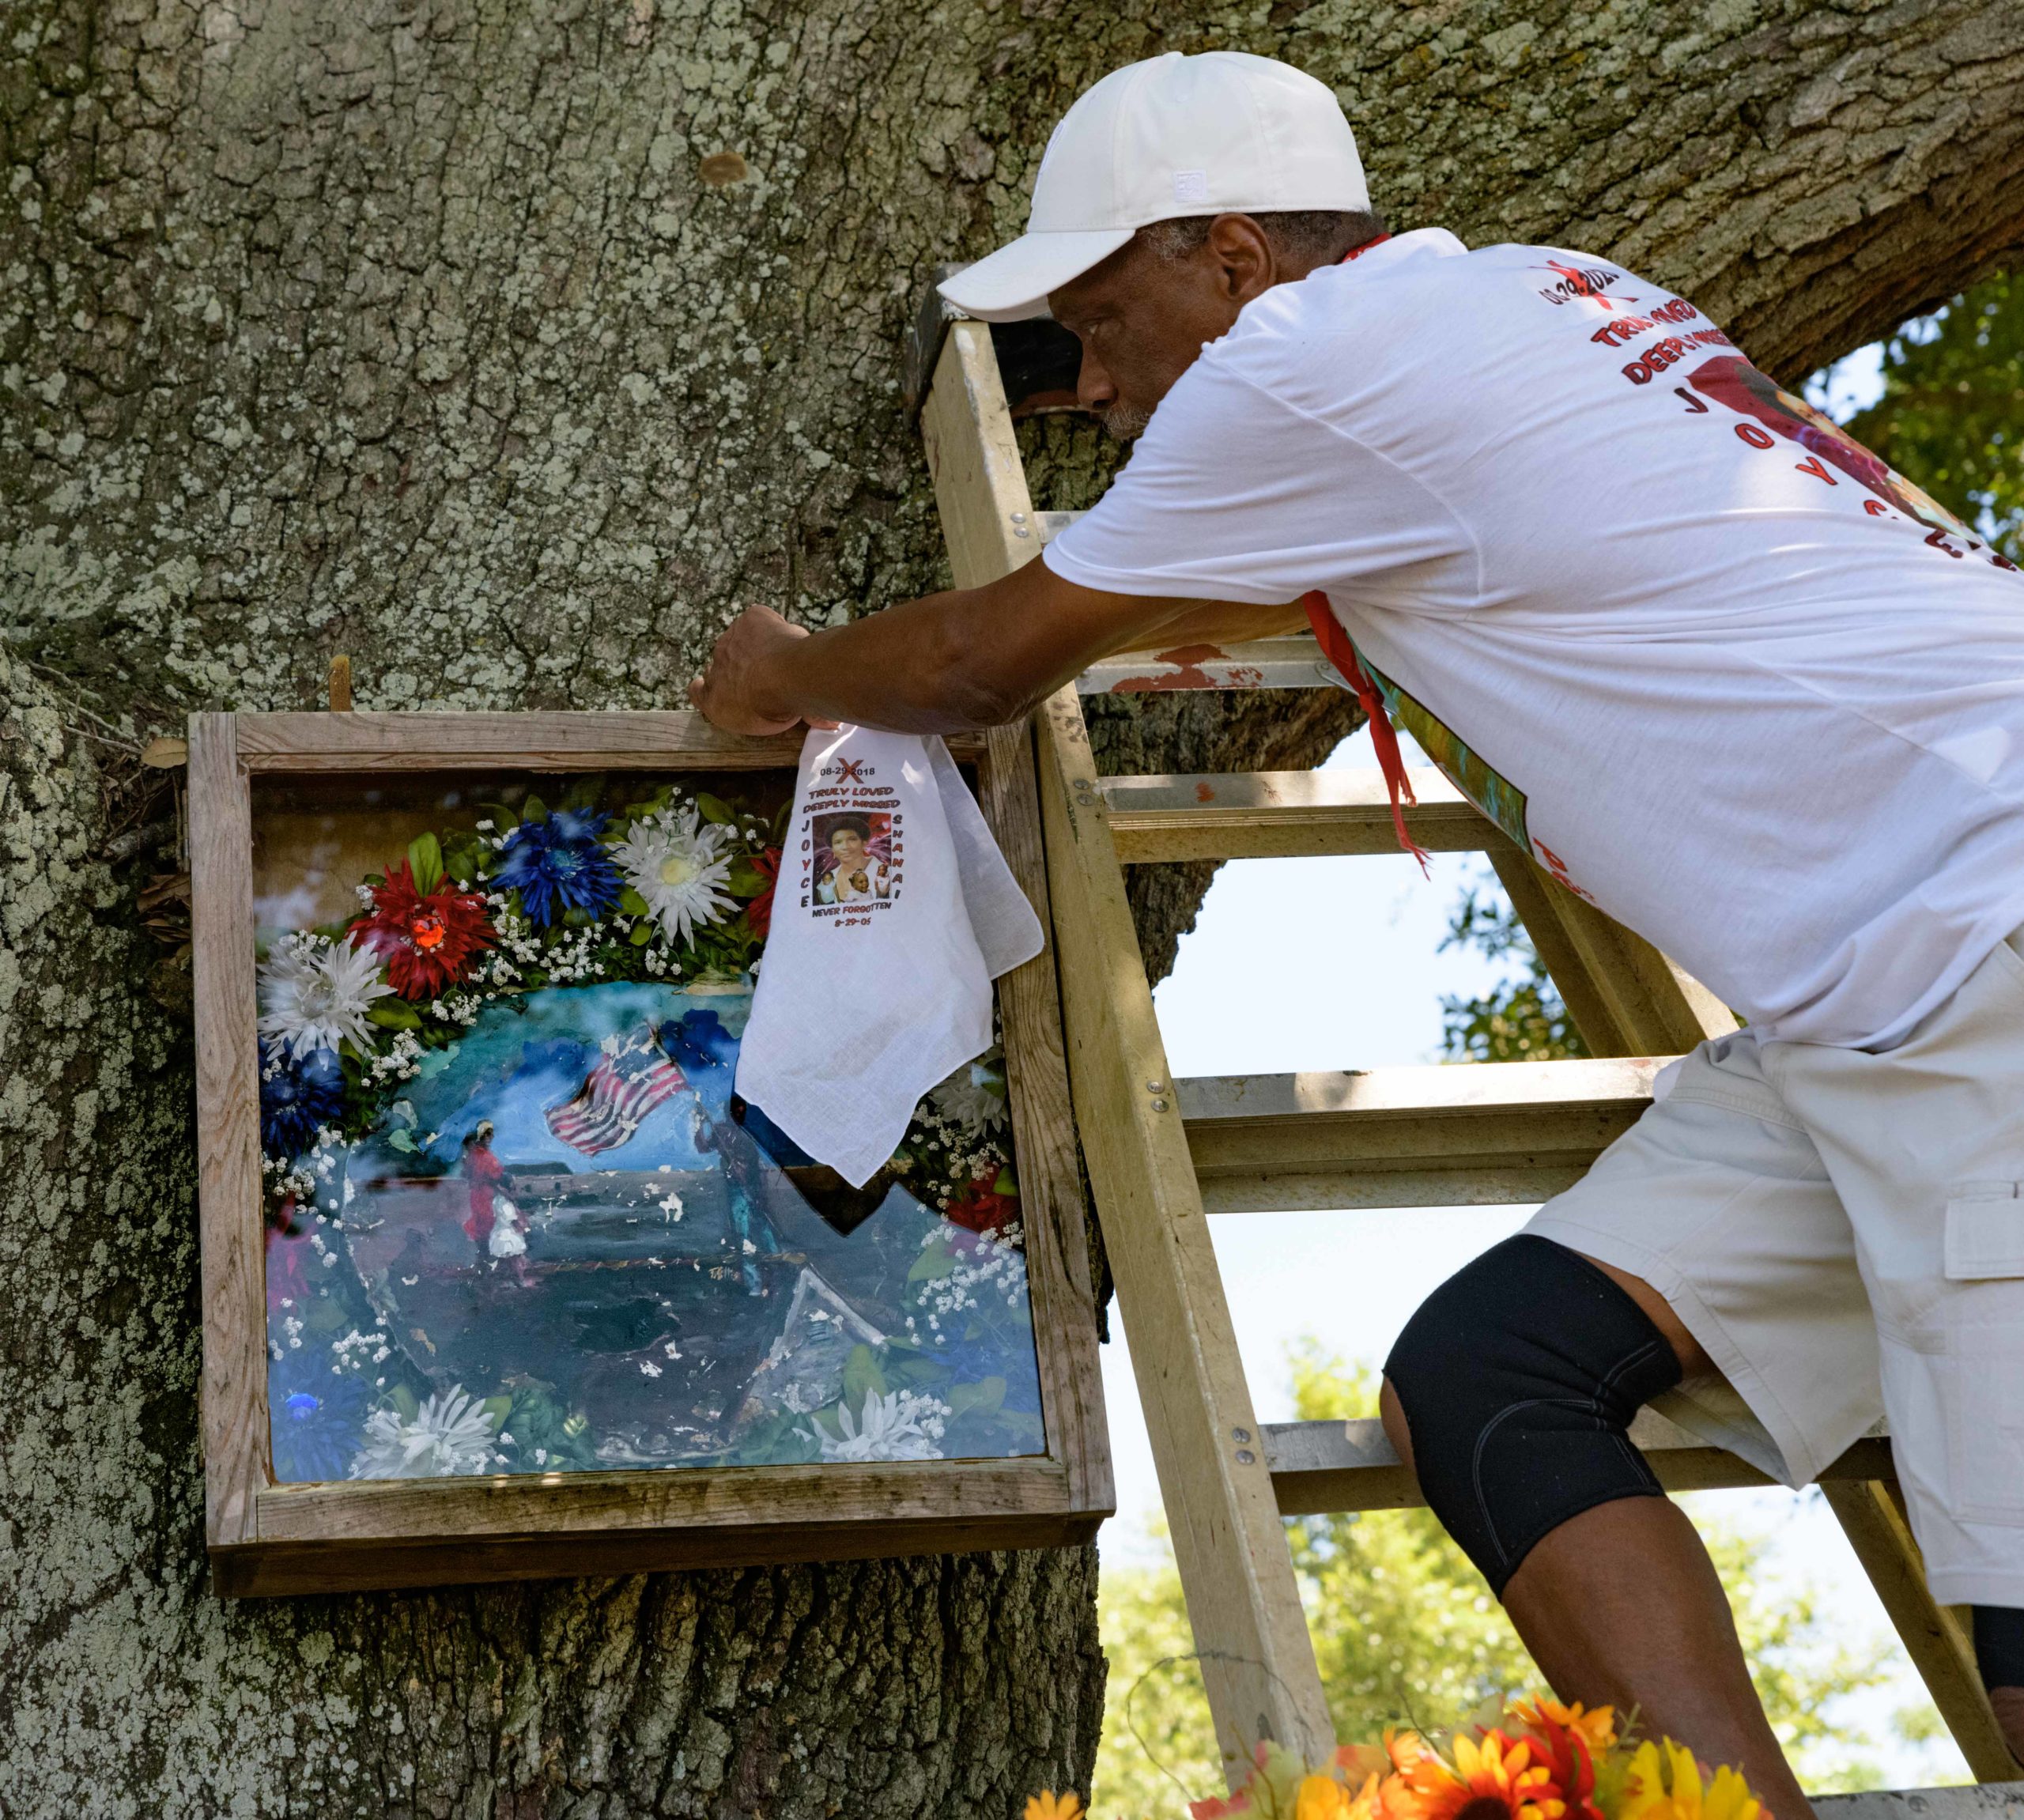 On Thursday, Aug. 29, 2019, Robert Green places a wreath in remembrance of his mother, Joyce, and granddaughter, Shanai, at the tree where his family home came off its foundation and floated down Tennessee Street in the Lower 9th Ward after the federal levee failures after Hurricane Katrina on August 29, 2005 in New Orleans. The family had to ride the roof and his mother and granddaughter did not survive the flood. Every year Green leads the Original Roof Top Riders second line to place a wreath on the anniversary of Katrina. This year the Da Truth Brass Band and Original Big Nine Social and Pleasure Club joined him and Big Chief Victor Harris, Spirit of the FiYiYi, of the Mandingo Warriors Mardi Gras Indians. Green was one of the first residents to return to the Lower 9th Ward and his home was replaced by actor Brad Pitt’s Make It Right Foundation. Photo by Matthew Hinton